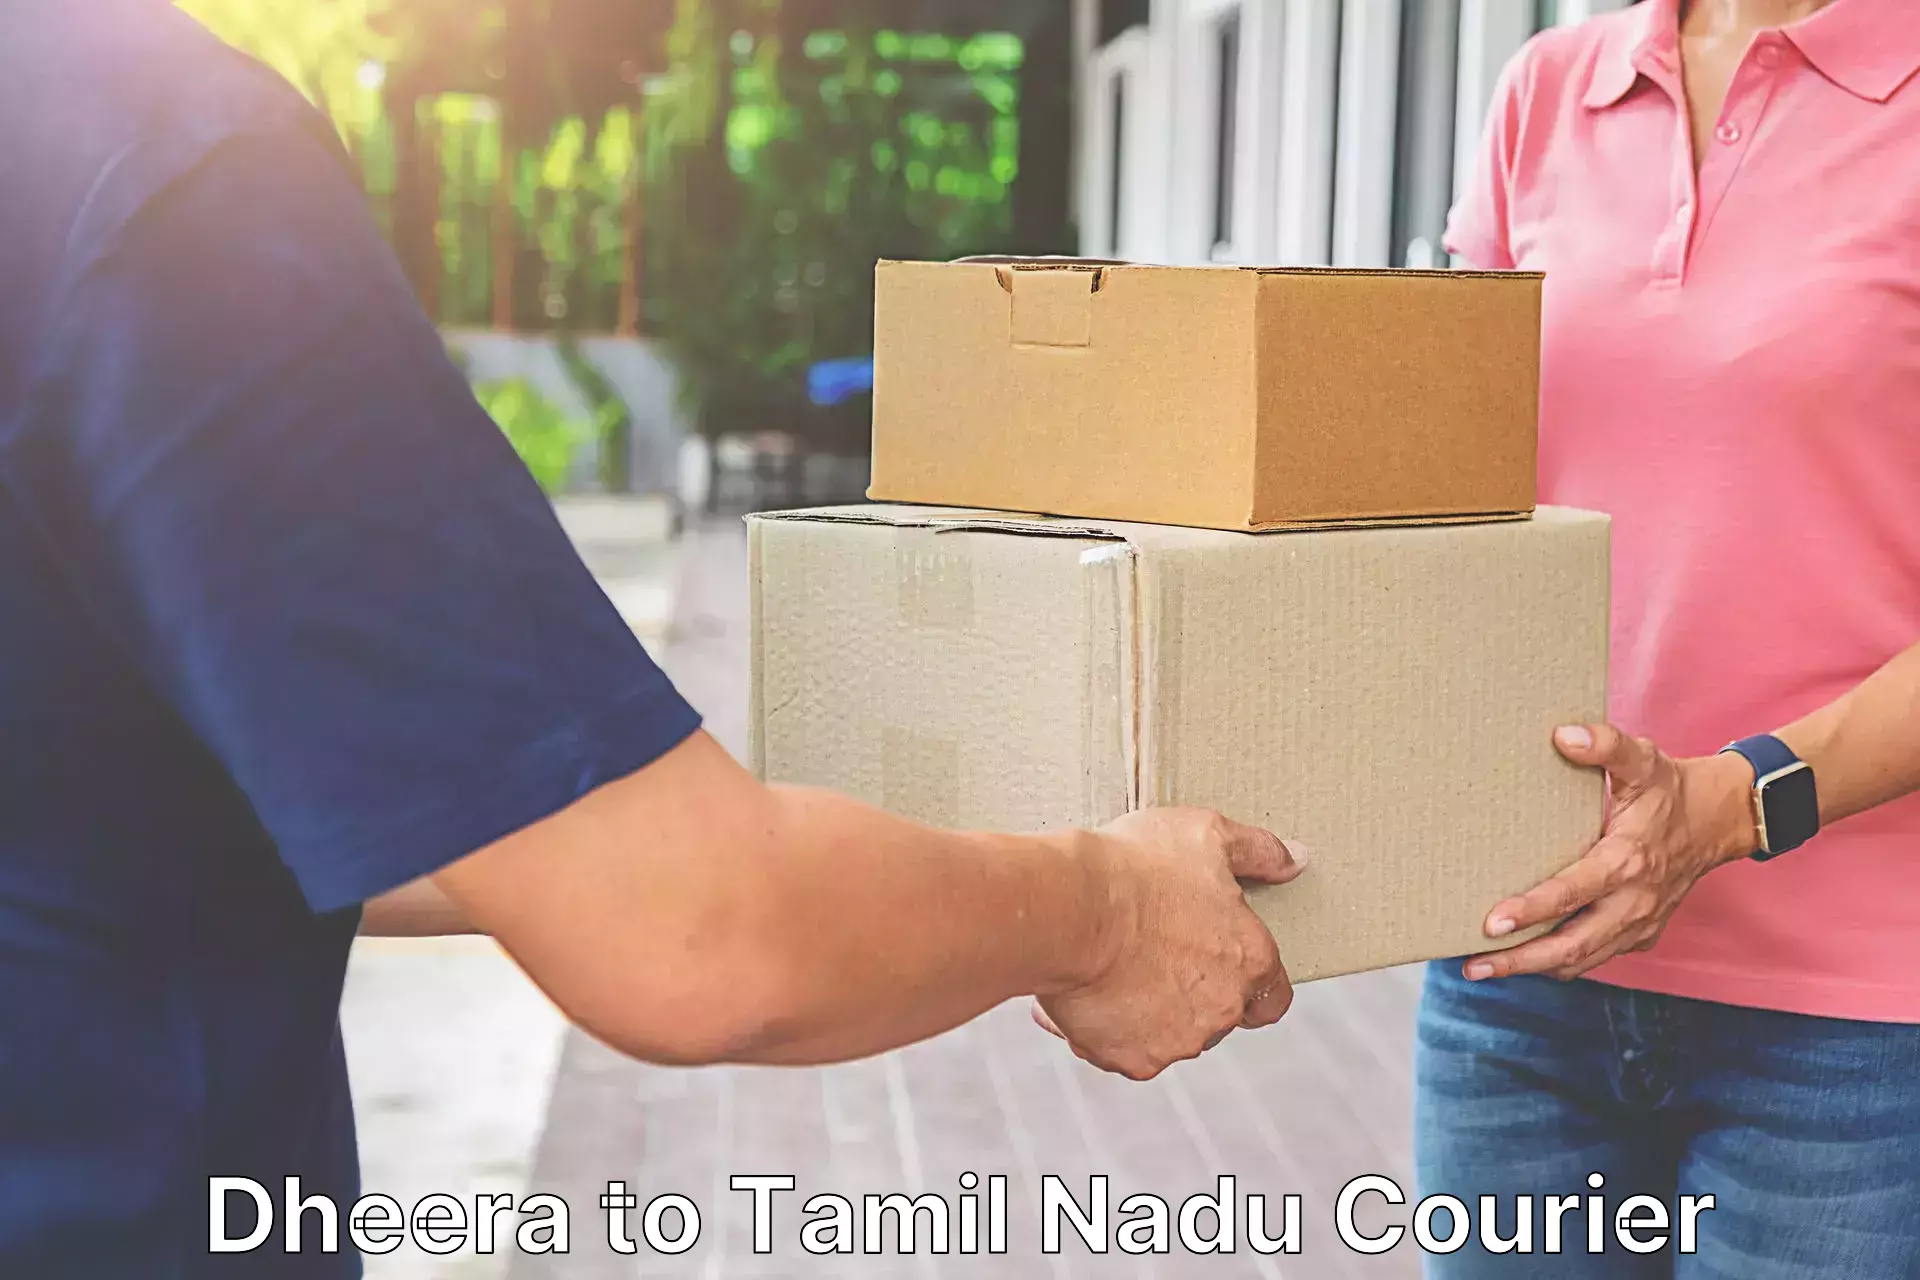 Courier service booking Dheera to Chennai Port